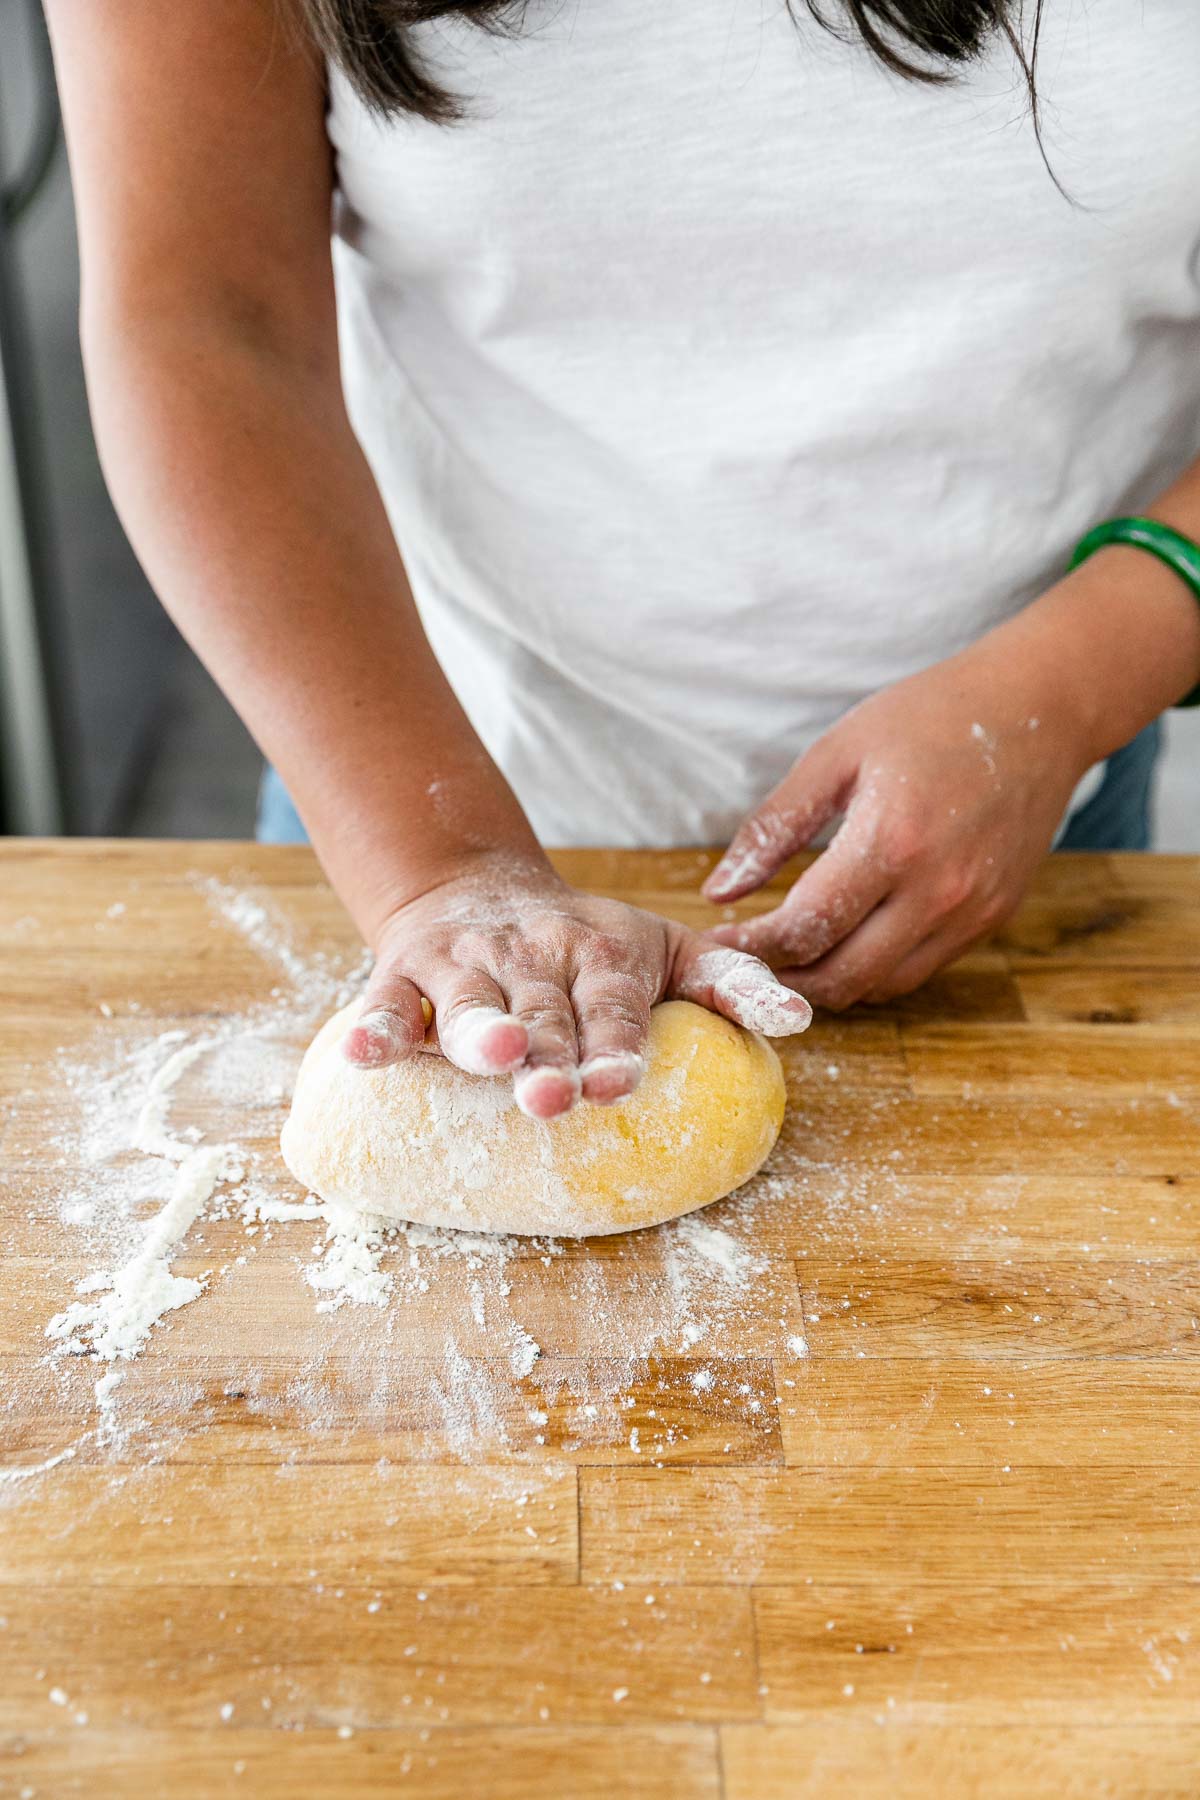 How to Make Homemade Pasta, Step 3: Knead the Pasta Dough. Jess of Plays Well With Butter uses her hands to knead the fresh pasta dough ball until it becomes smooth & supple. The ​dough ball has been dusted with additional flour and is being kneaded on a clean butcher block countertop.